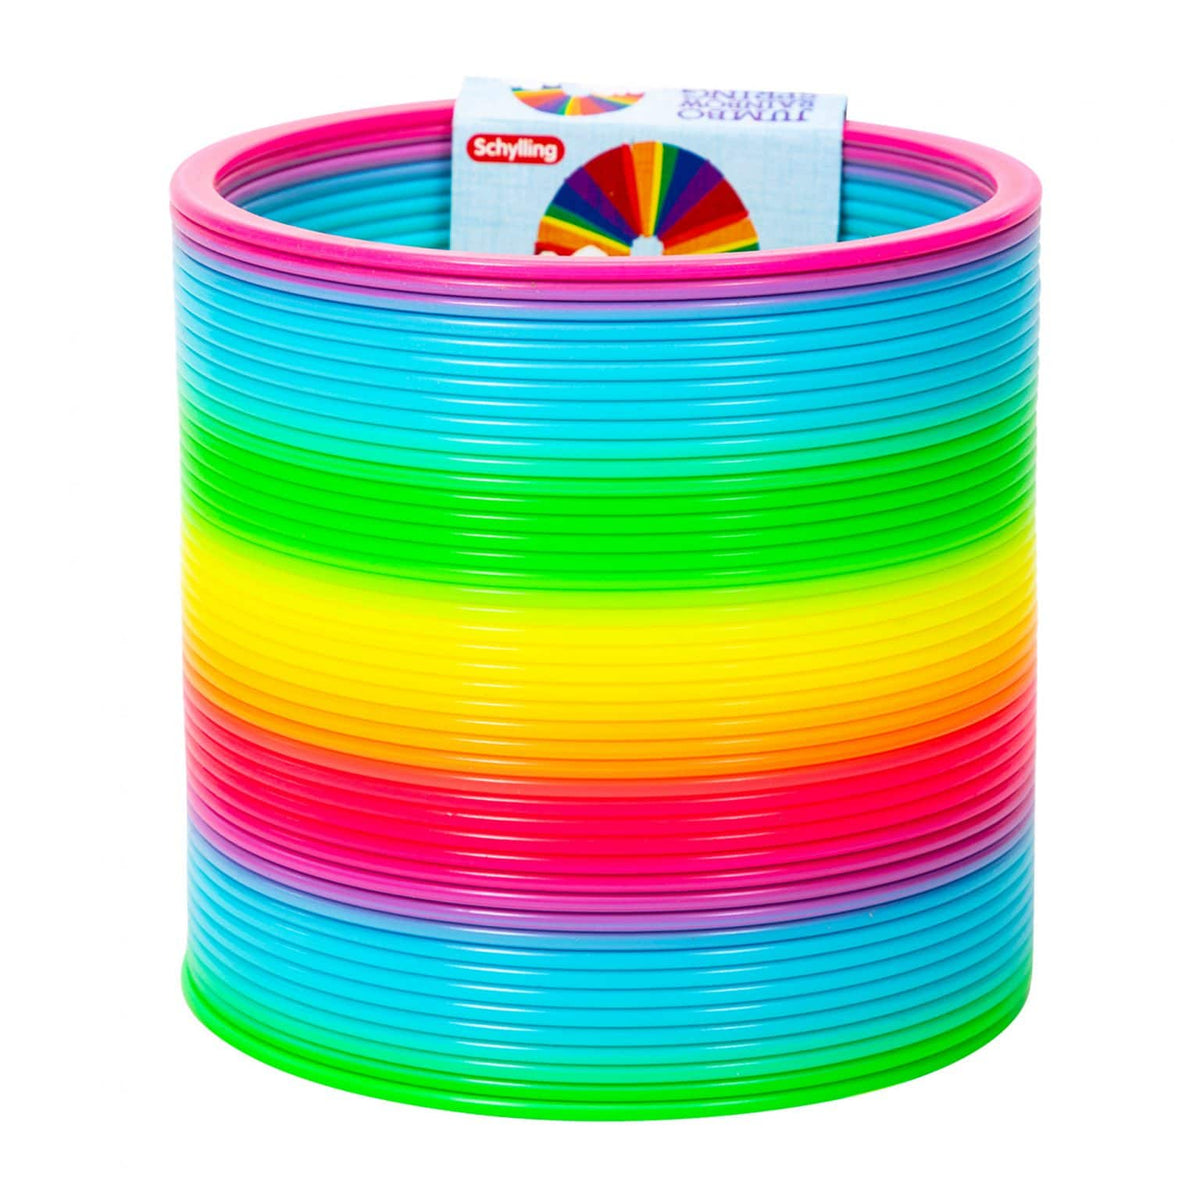 Rear view of Jumbo Rainbow Spring in package and upright.